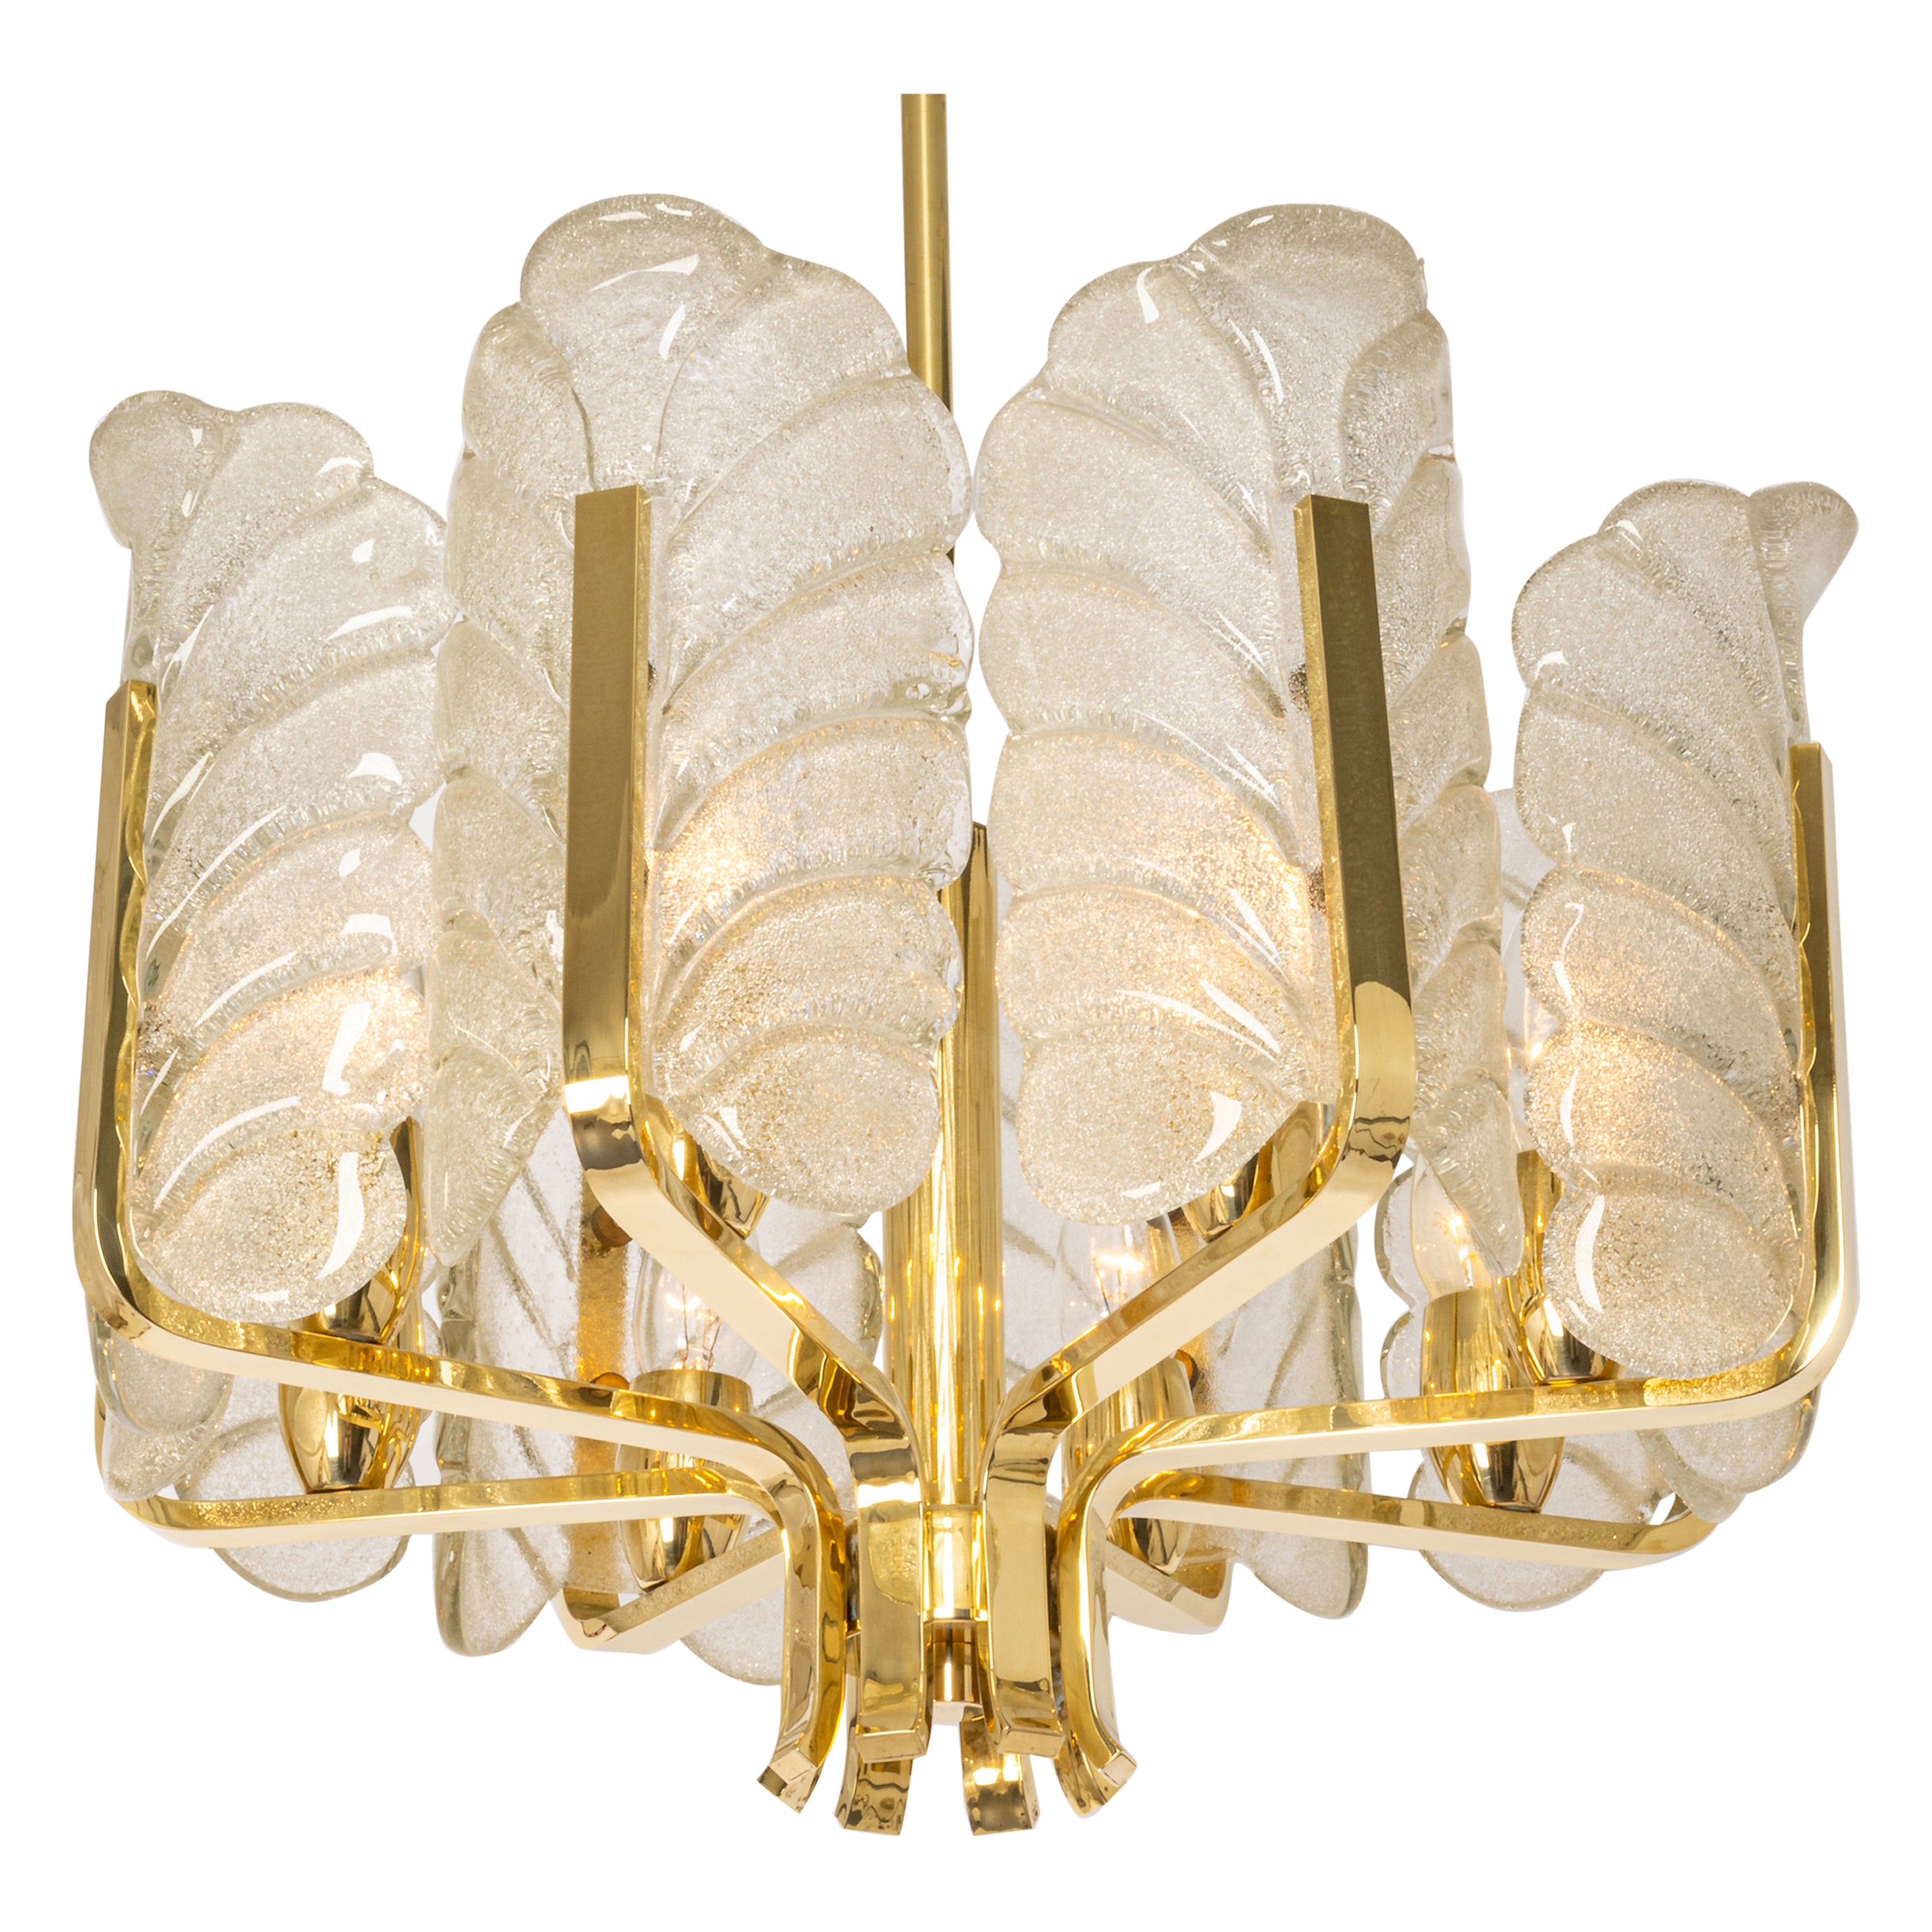 1 of 4 Stunning Carl Fagerlund Chandelier Murano Glass Leaves, 1960s For Sale